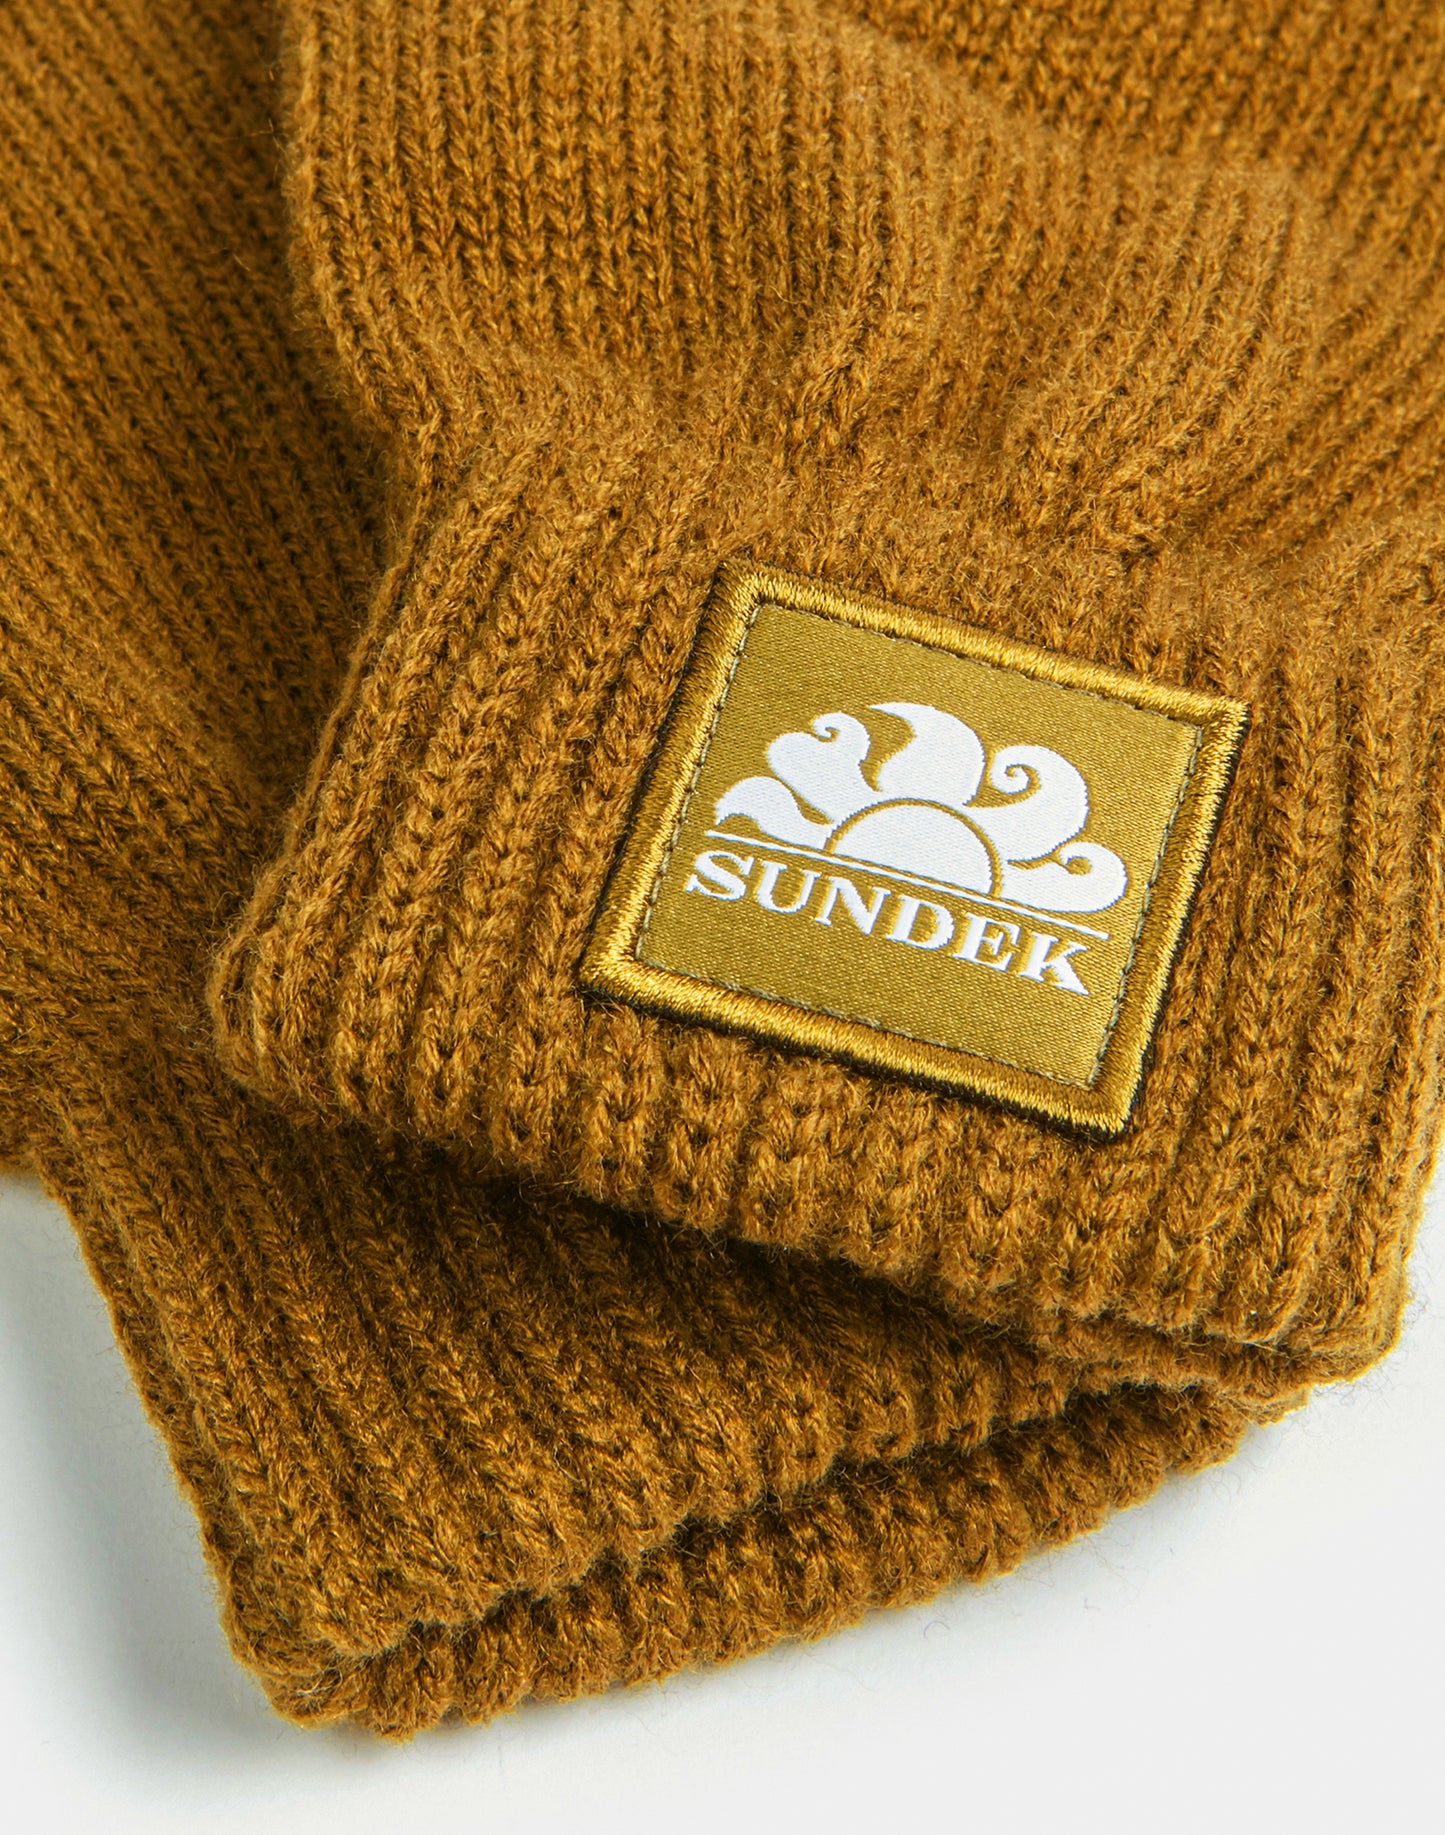 CHILD'S GLOVES WITH LOGO